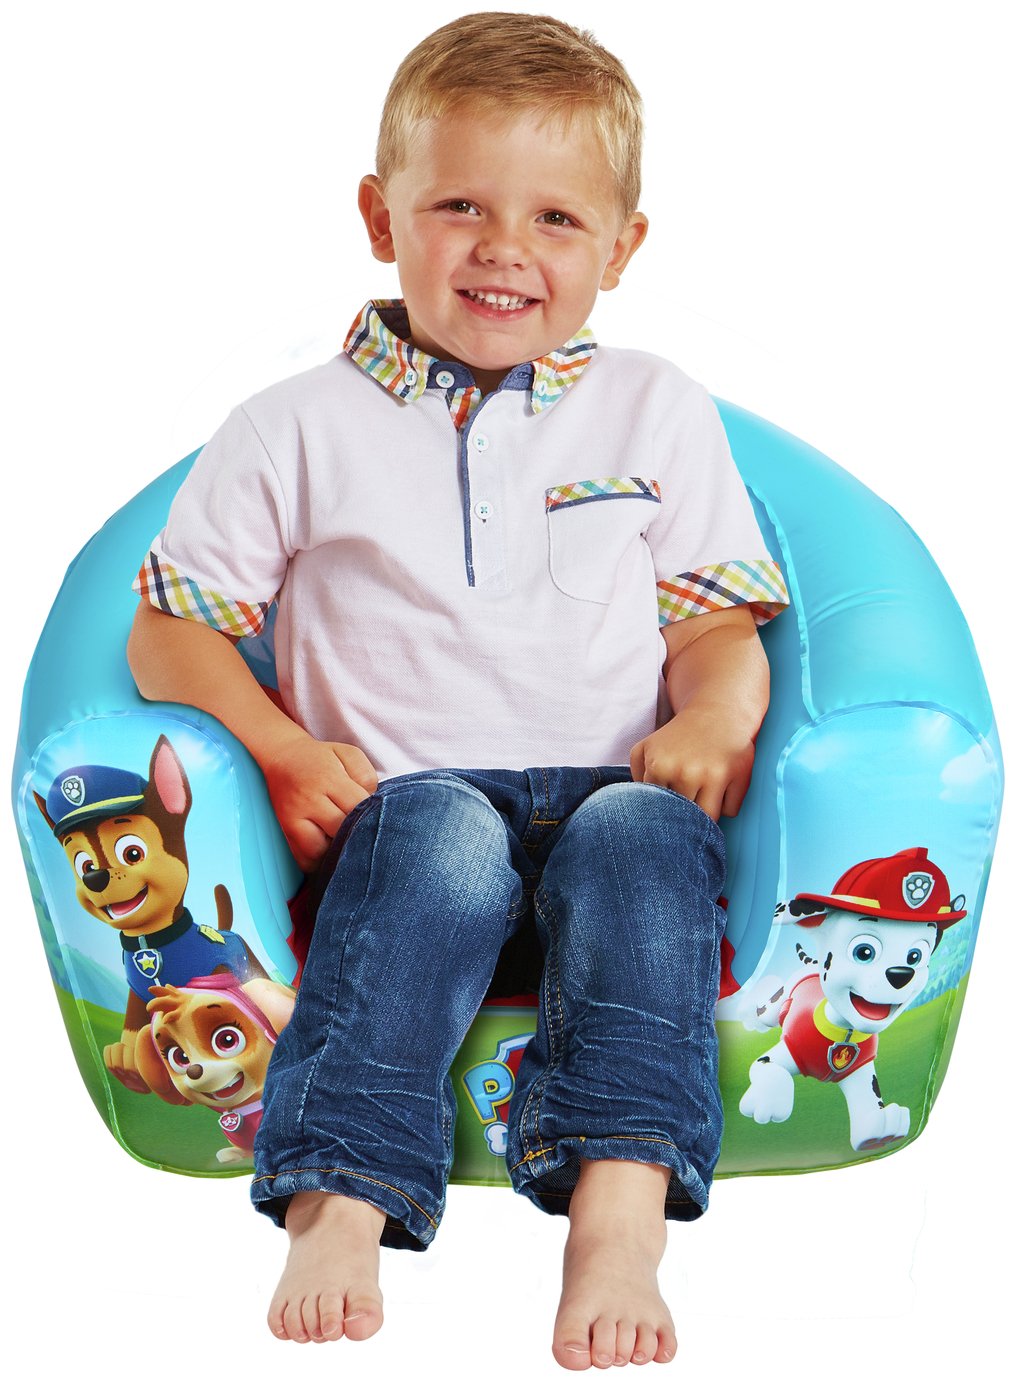 PAW Patrol Flocked Chair Review